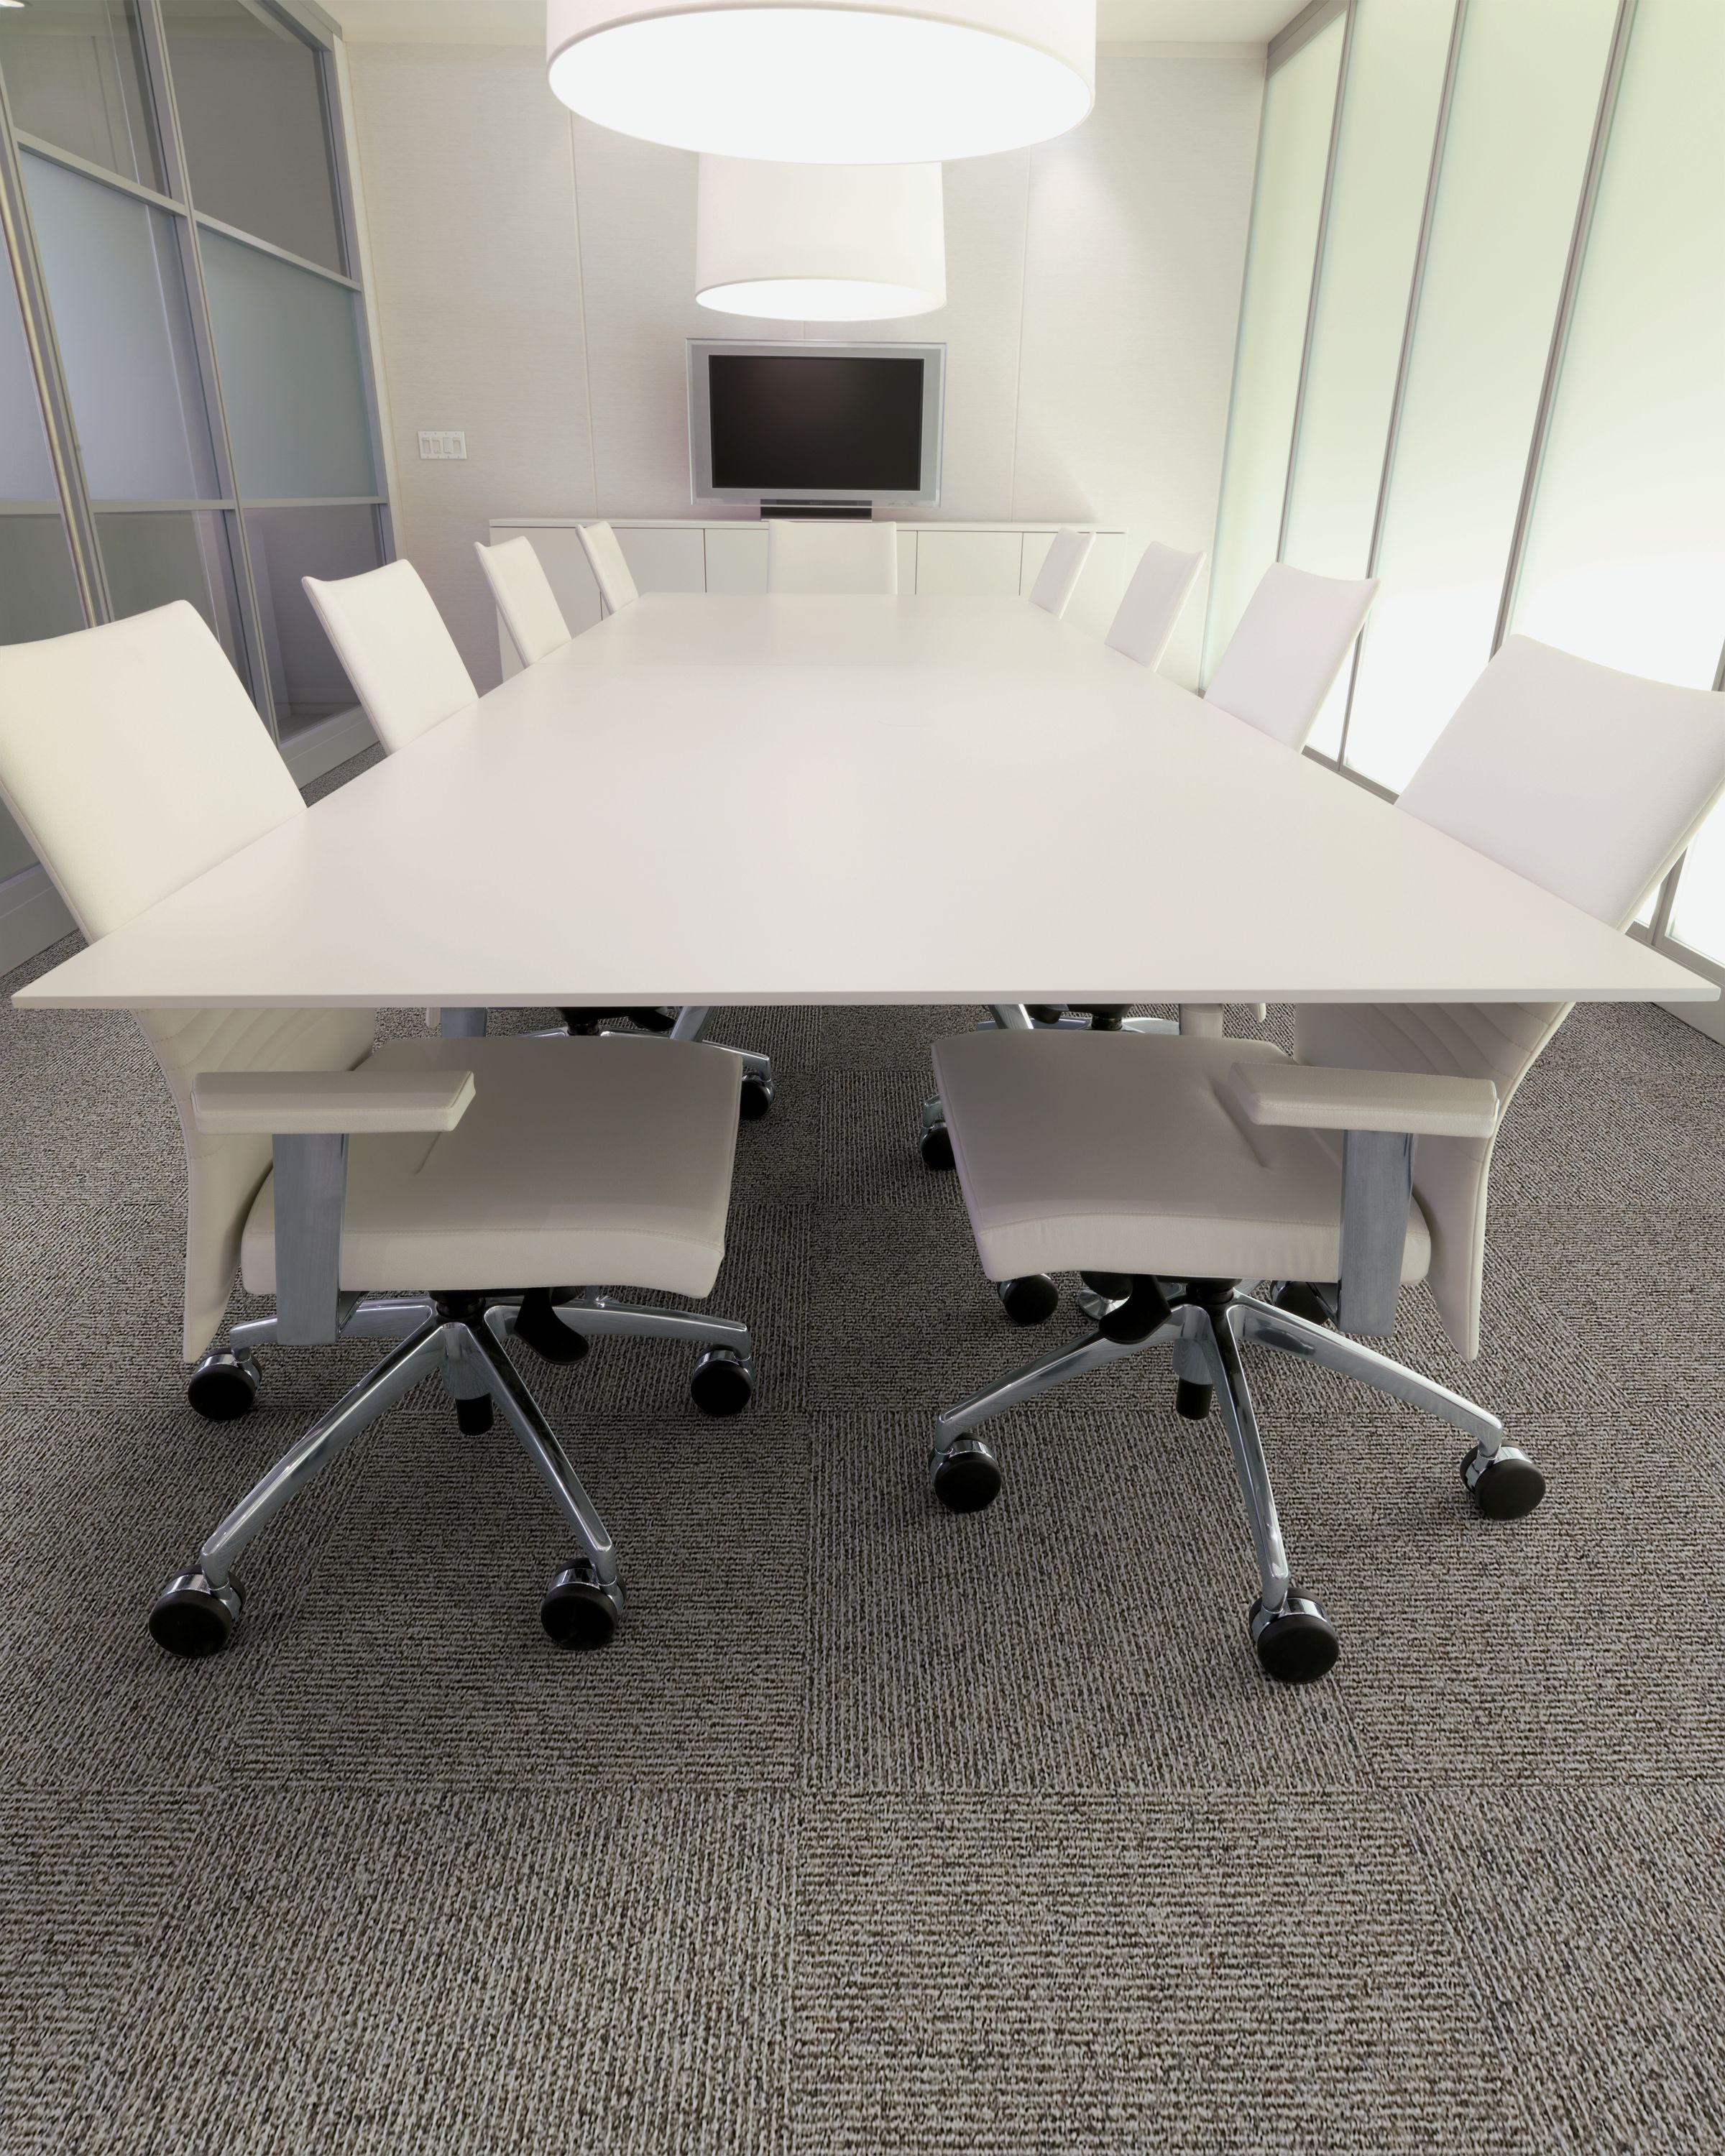 Interface Broomed carpet tile in conference room with long white table and chairs numéro d’image 1